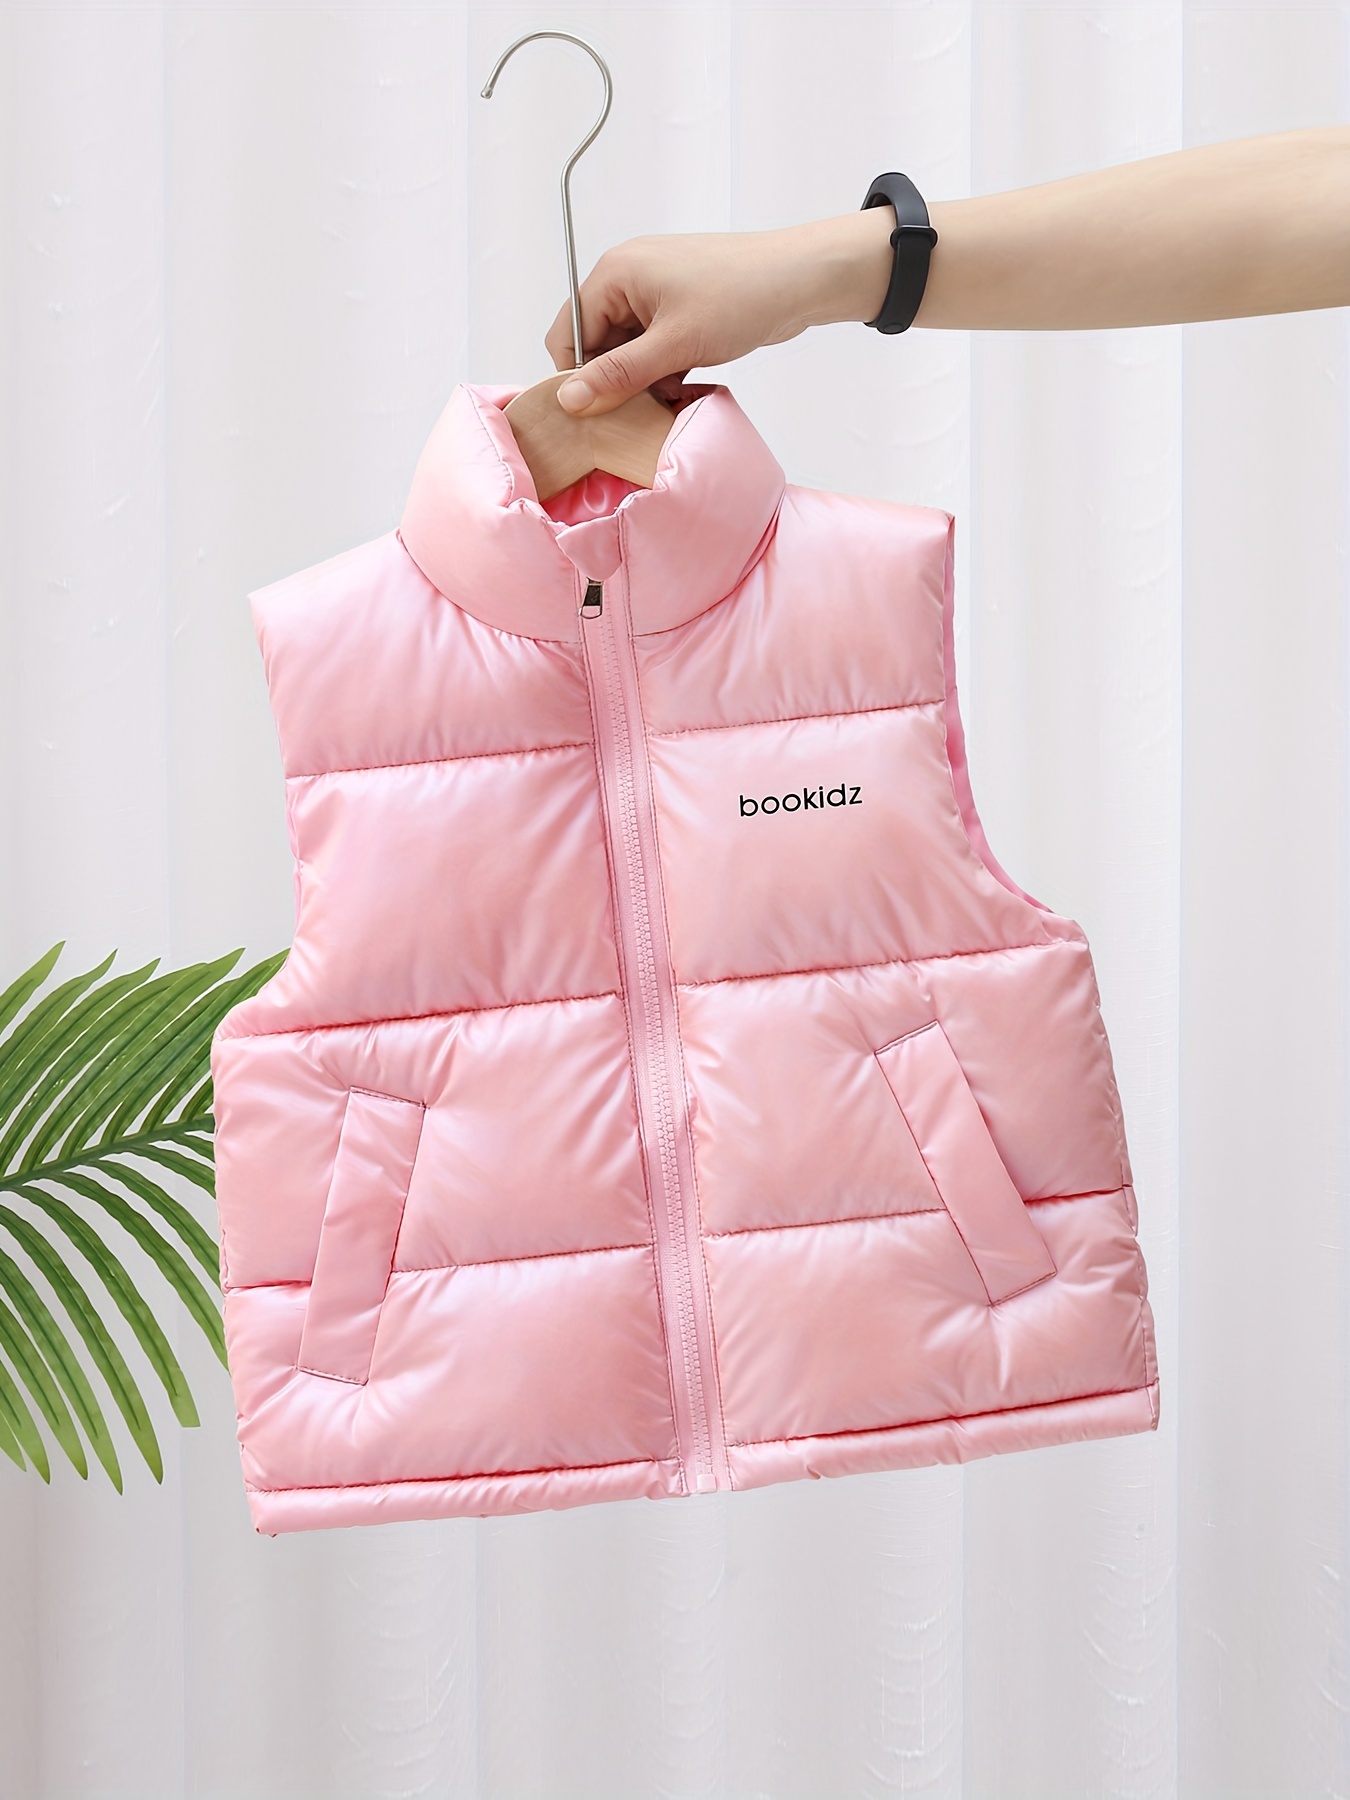 Women's Vests Glossy Long Winter Solid Hooded Zipper Thick Ladies Casual  Sleeveless Jacket Pockets Puffer Vest For Female